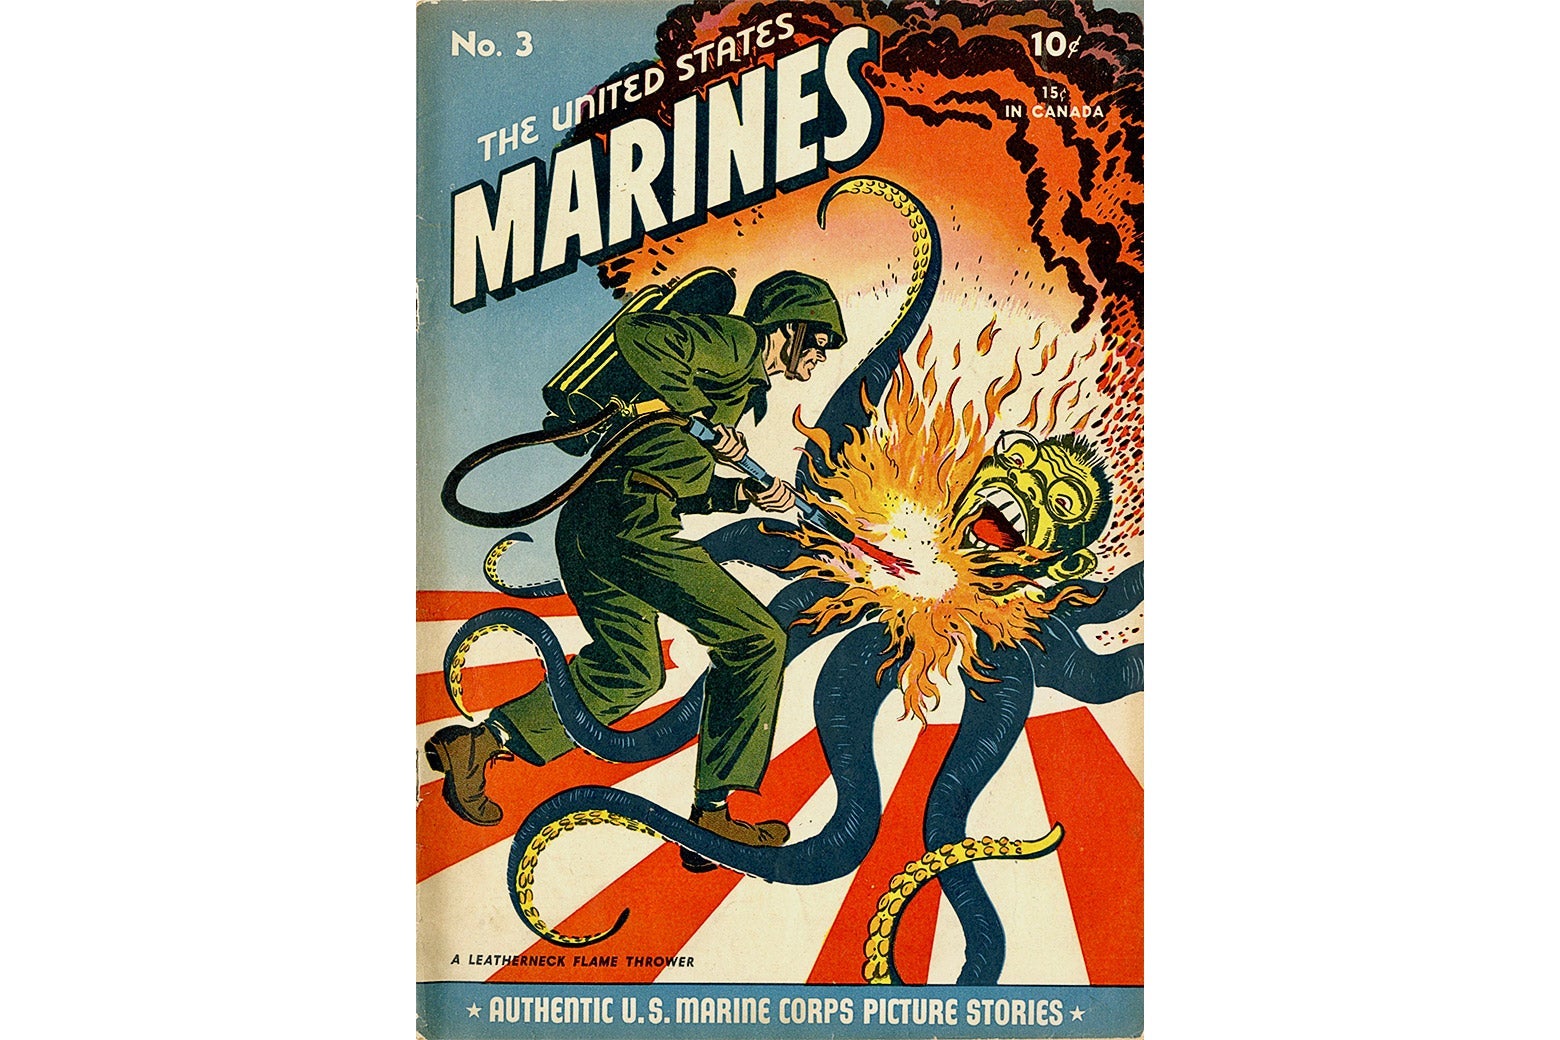 A white man in army fatigues uses a flamethrower on a stereotypical Asian character with octopus tentacles.